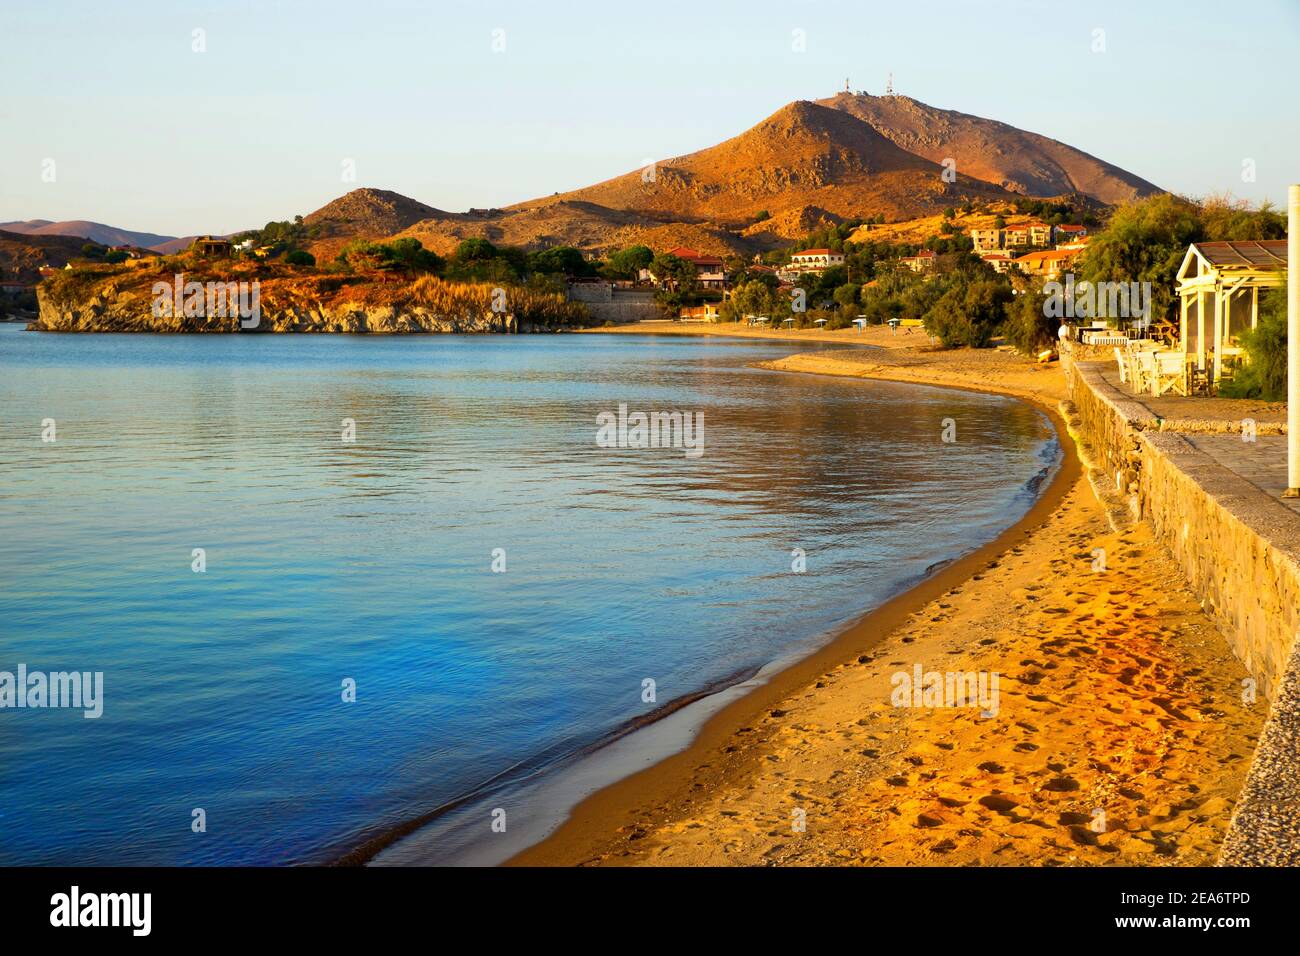 Mountain, calm beach and surrounding with houses of town Myrina, island Limnos, Greece in sunny autumn day. Stock Photo